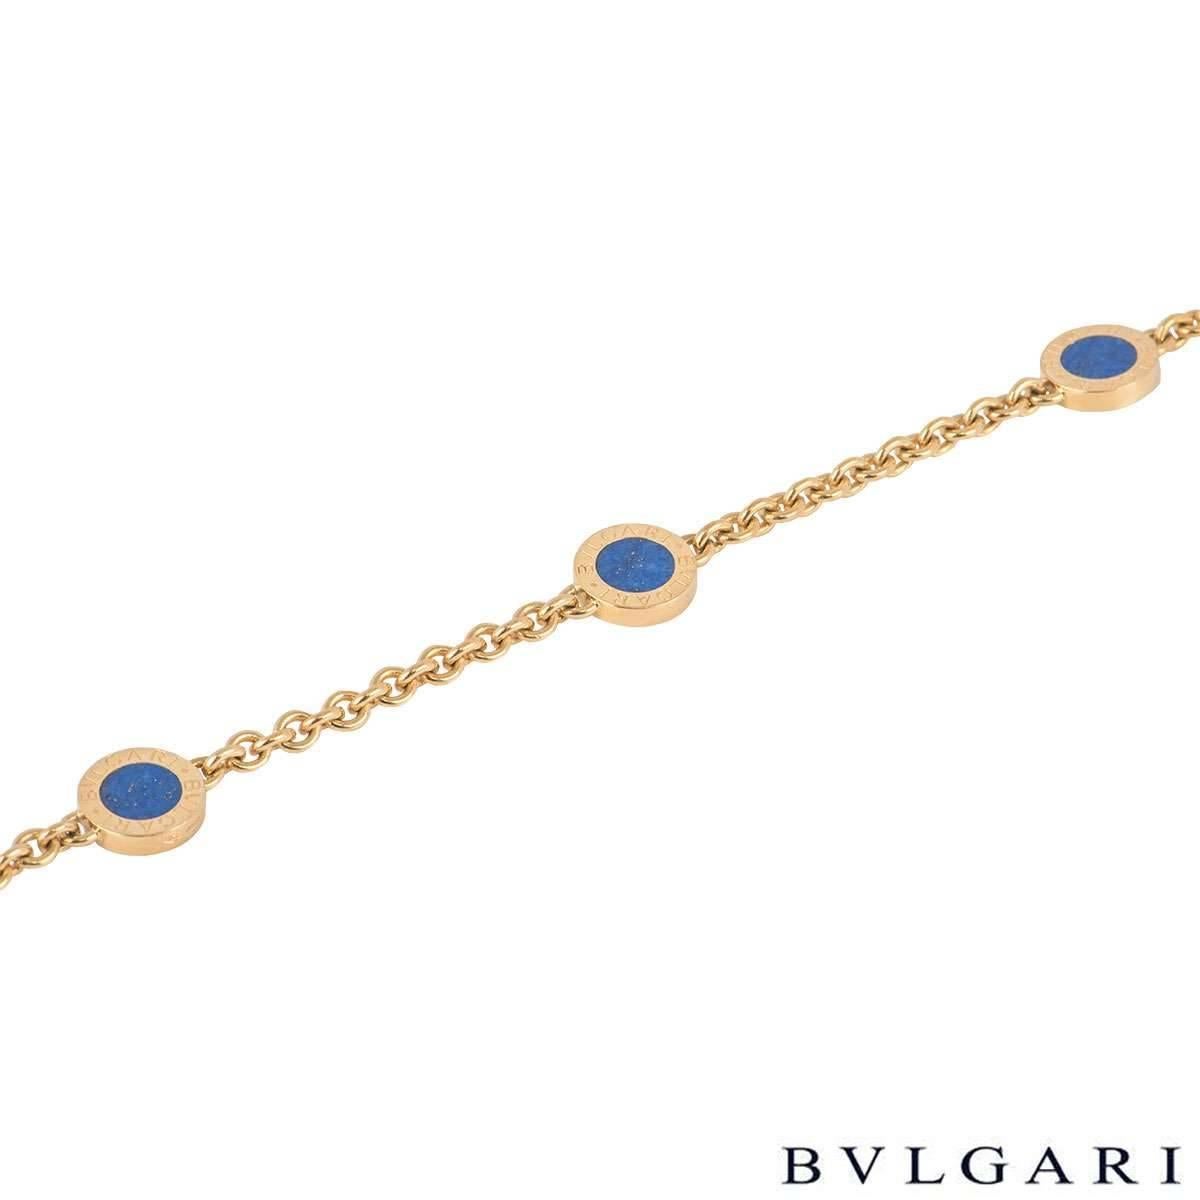 An 18k yellow gold bracelet from the Bulgari Bvlgari collection. The bracelet features 4 circular disks set with lapis lazuli to both sides. The bracelet measures 7.5 inches in length and has a gross weight of 13.36 grams.

The bracelet comes